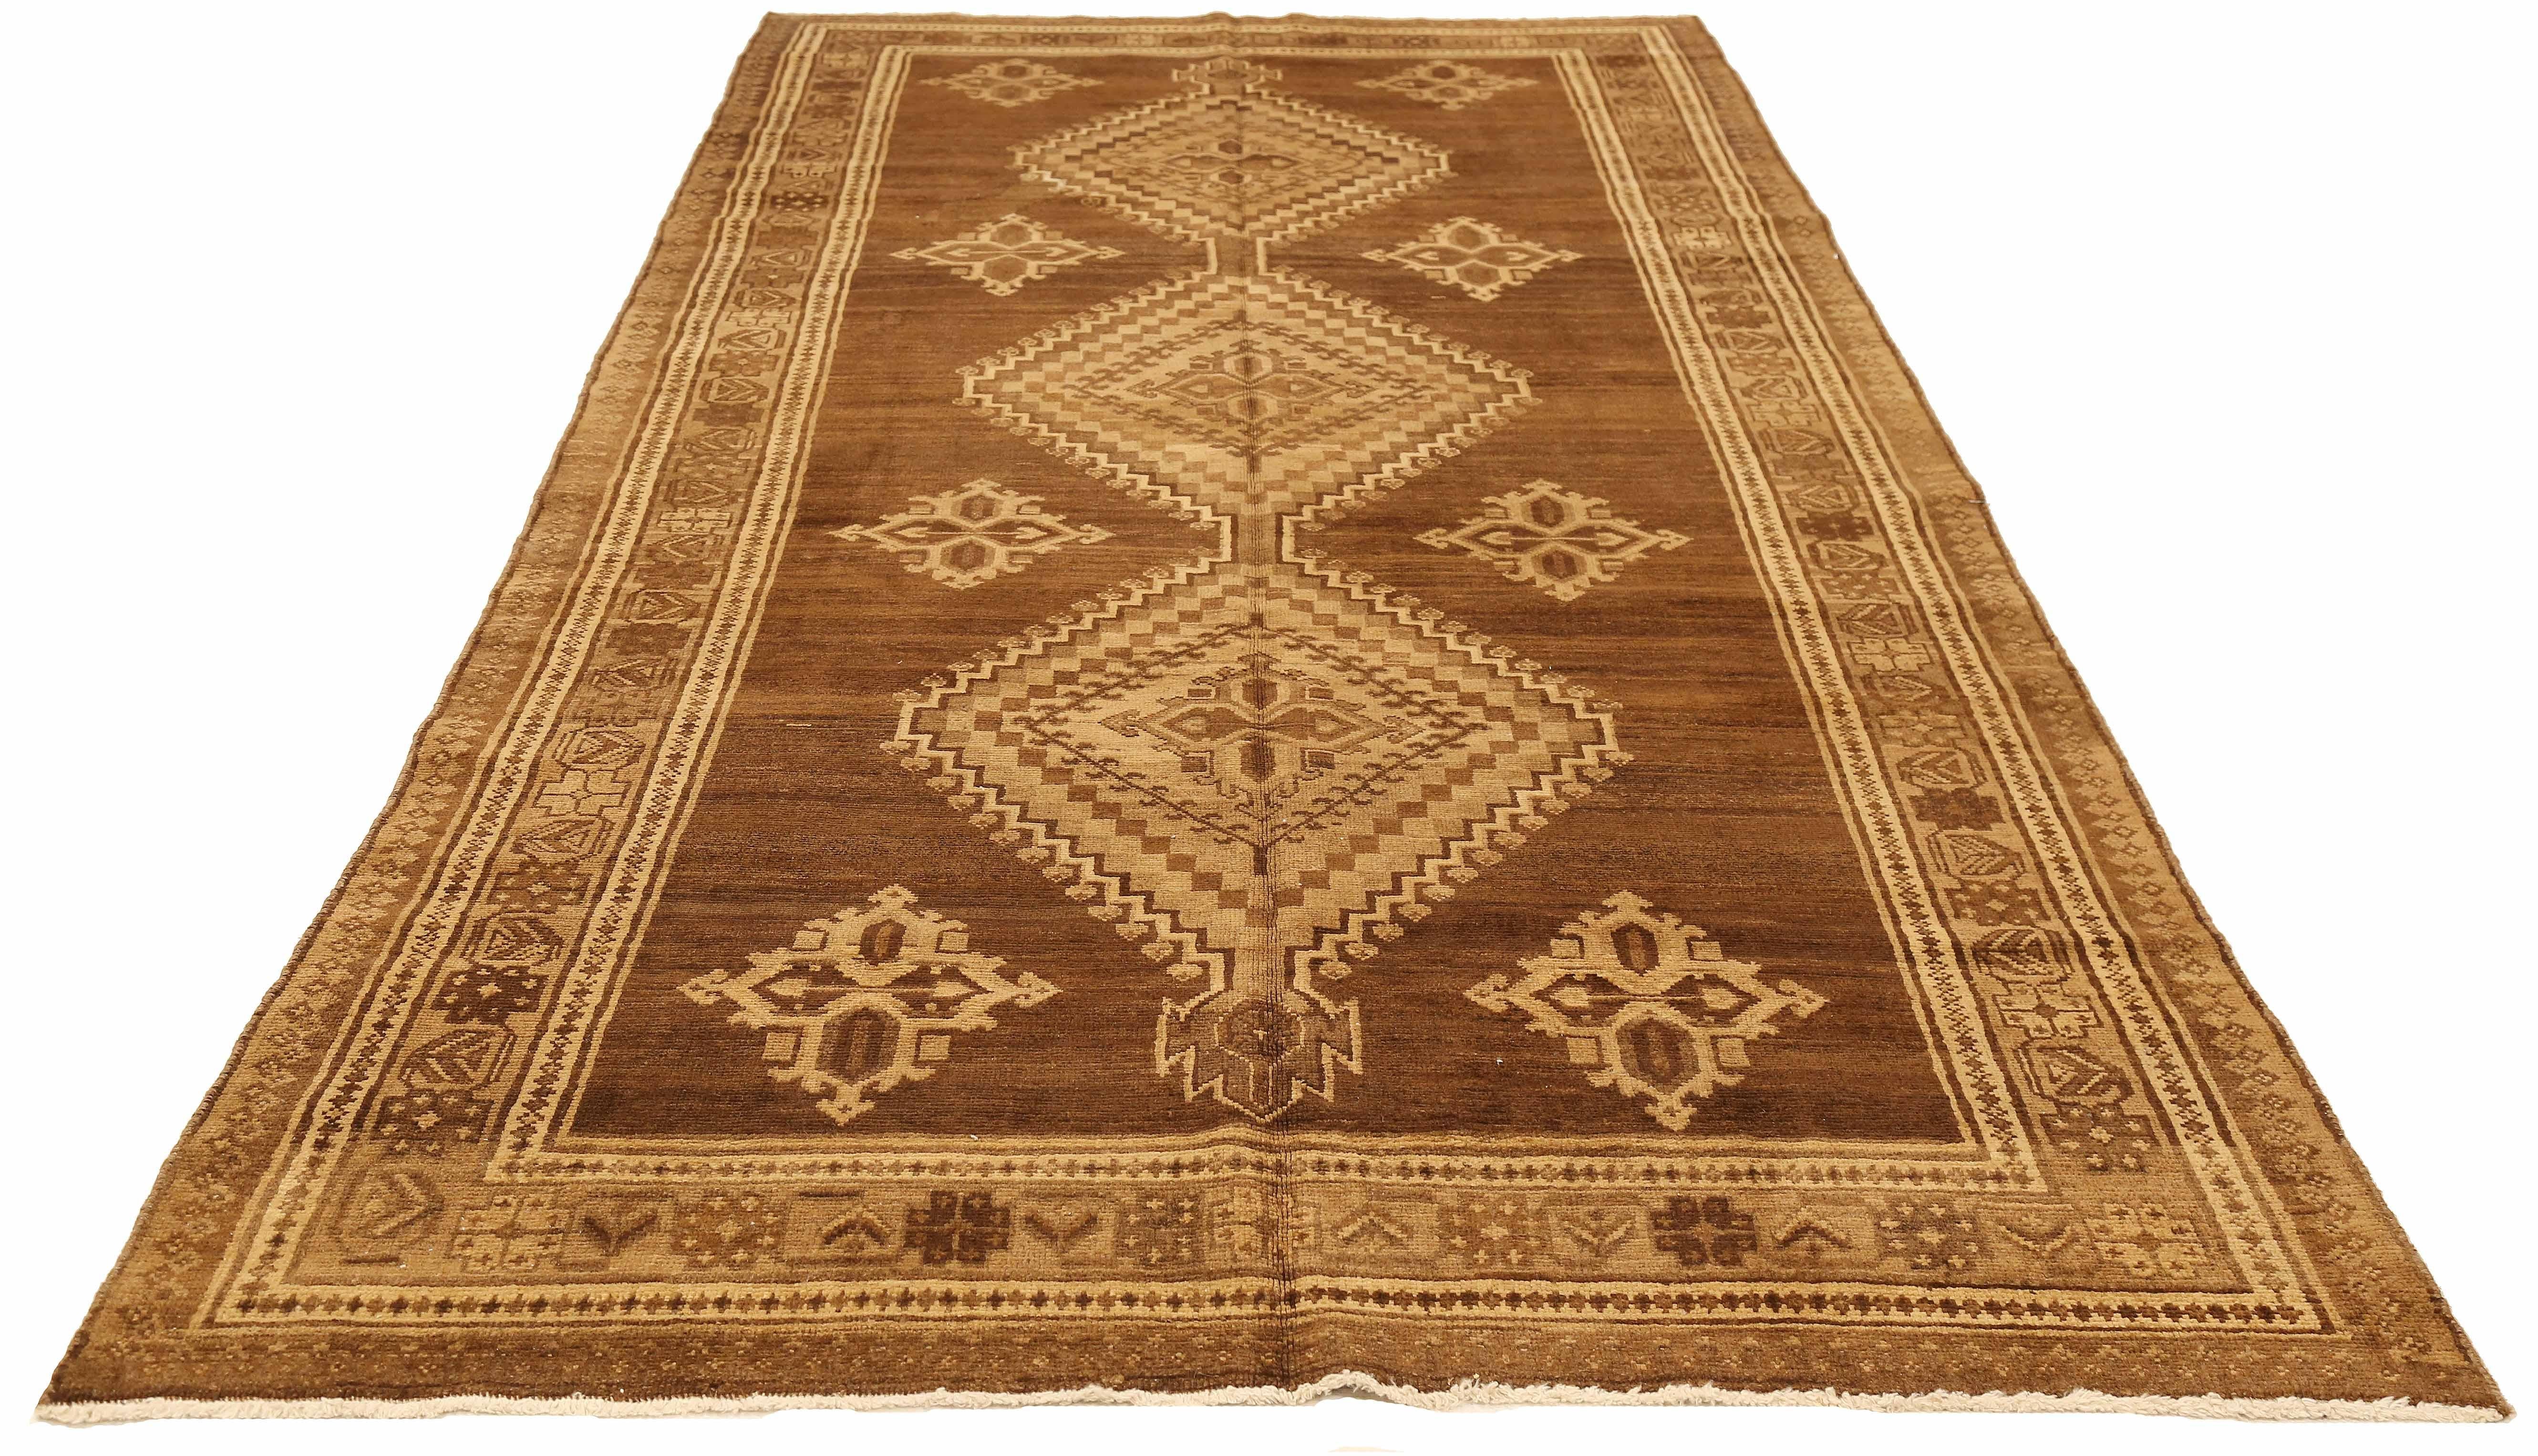 Antique Persian runner rug handwoven from the finest sheep’s wool and colored with all-natural vegetable dyes that are safe for humans and pets. It’s a traditional Malayer design featuring brown and beige medallion details over a brown field. It’s a